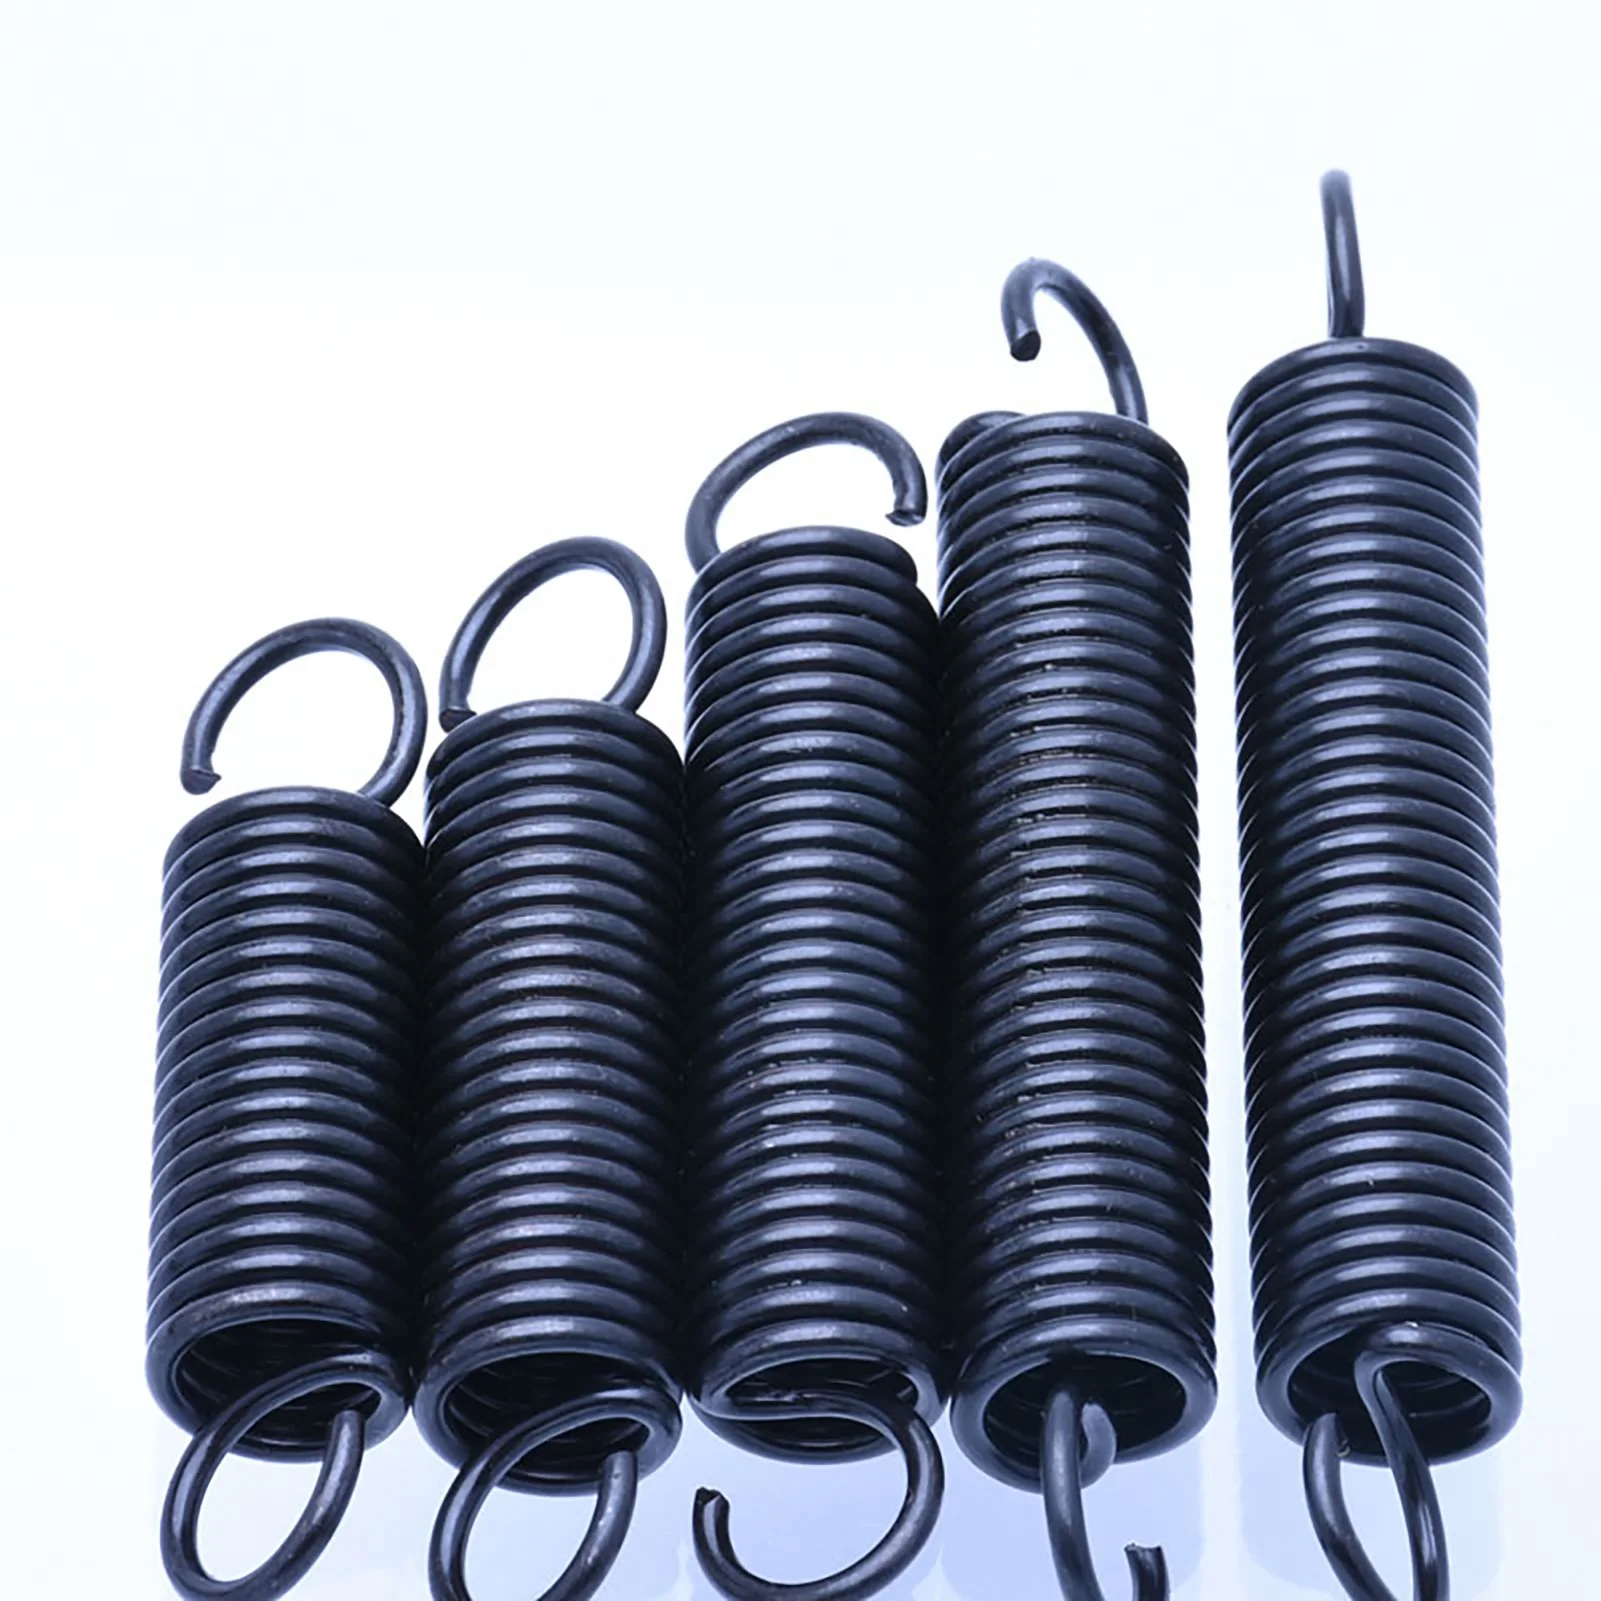 

Wire Diameter 0.5mm, Outer Diameter 4mm, Length 15-60mm, Dual Tension Spring Steel Extension Spring with Hook 10PCS